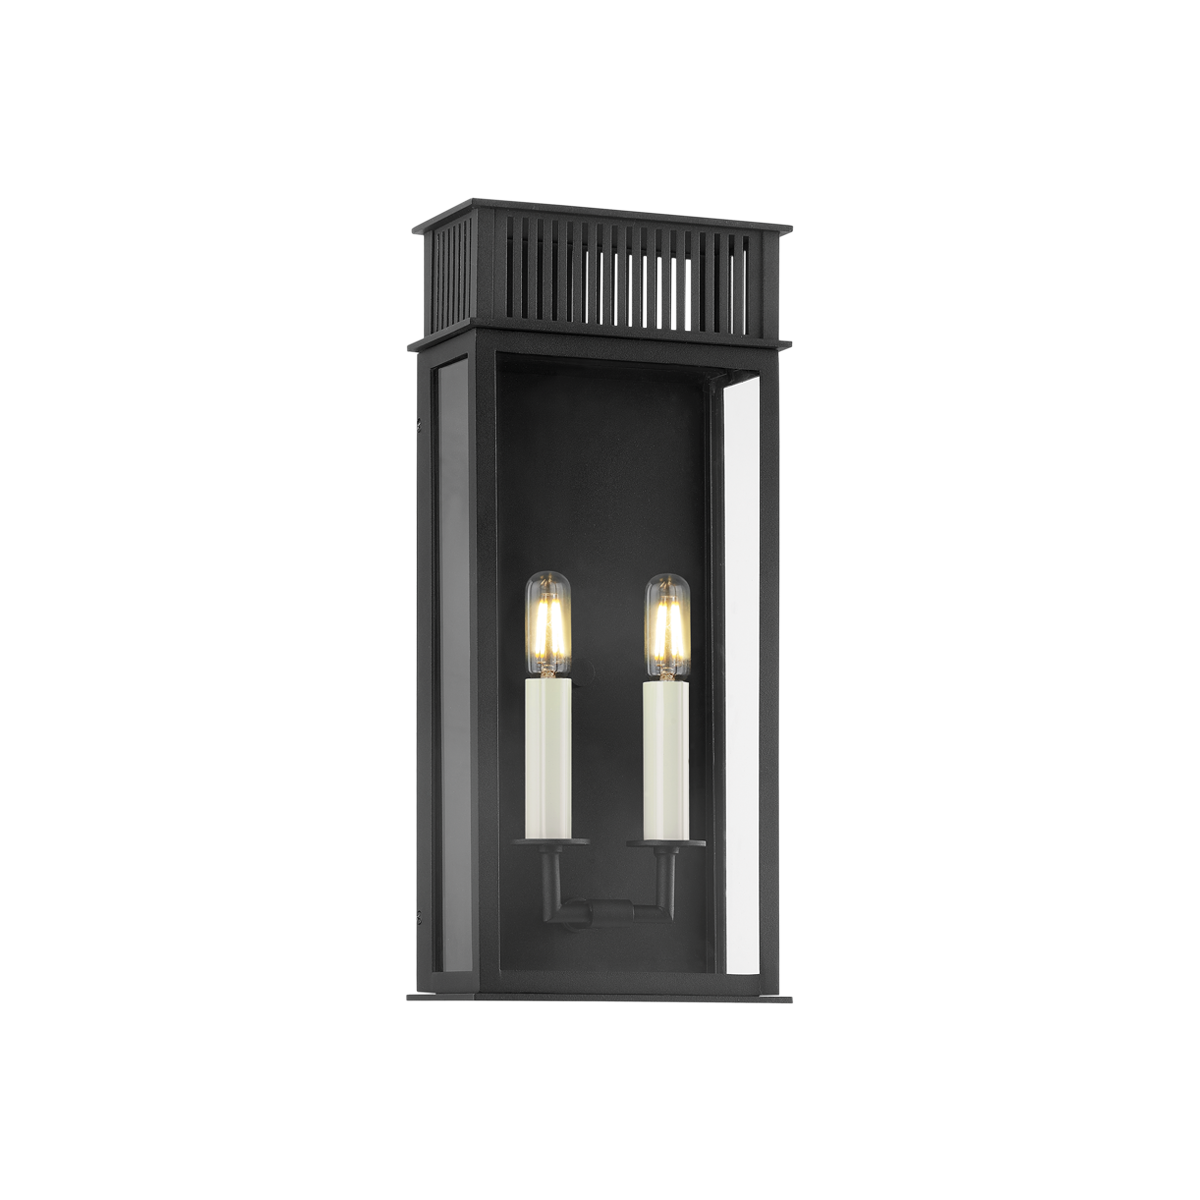 Gridley Exterior Wall Sconce Medium Wall Sconce 